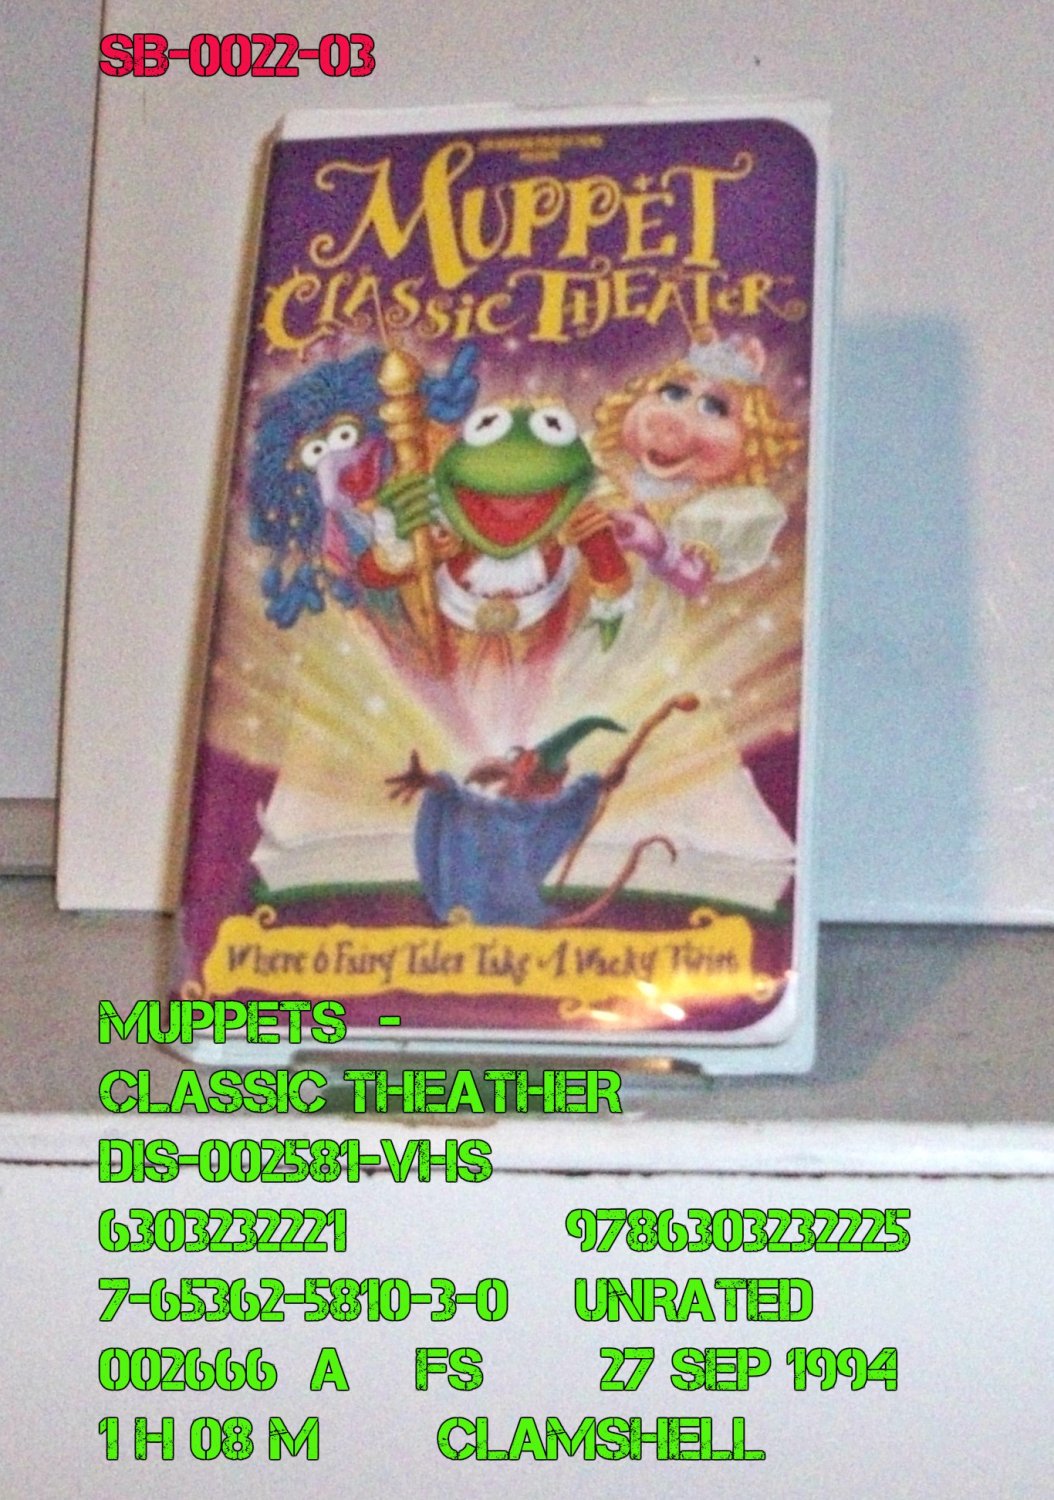 VHS - MUPPETS - CLASSIC THEATER